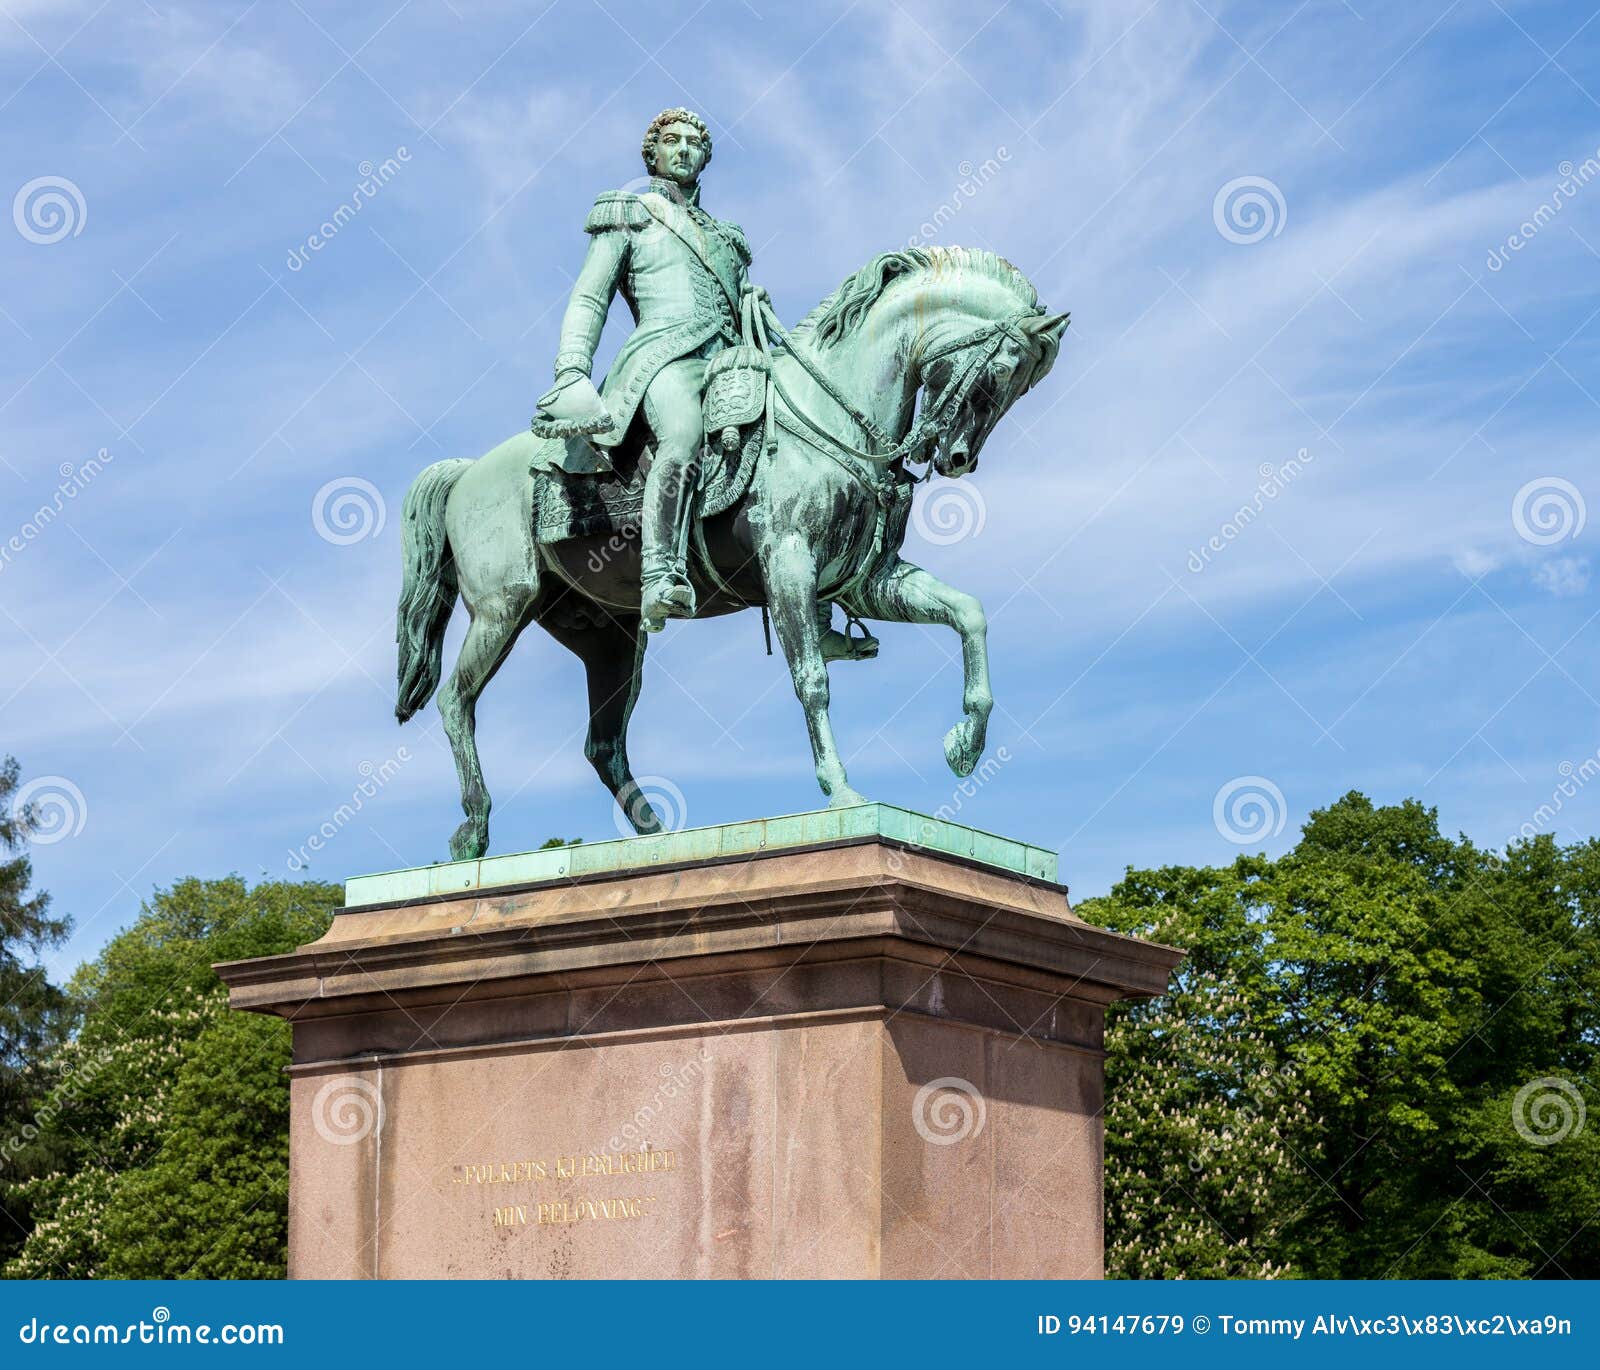 statue of former swedish and norwegian king karl xiv johan sitting on a horse.